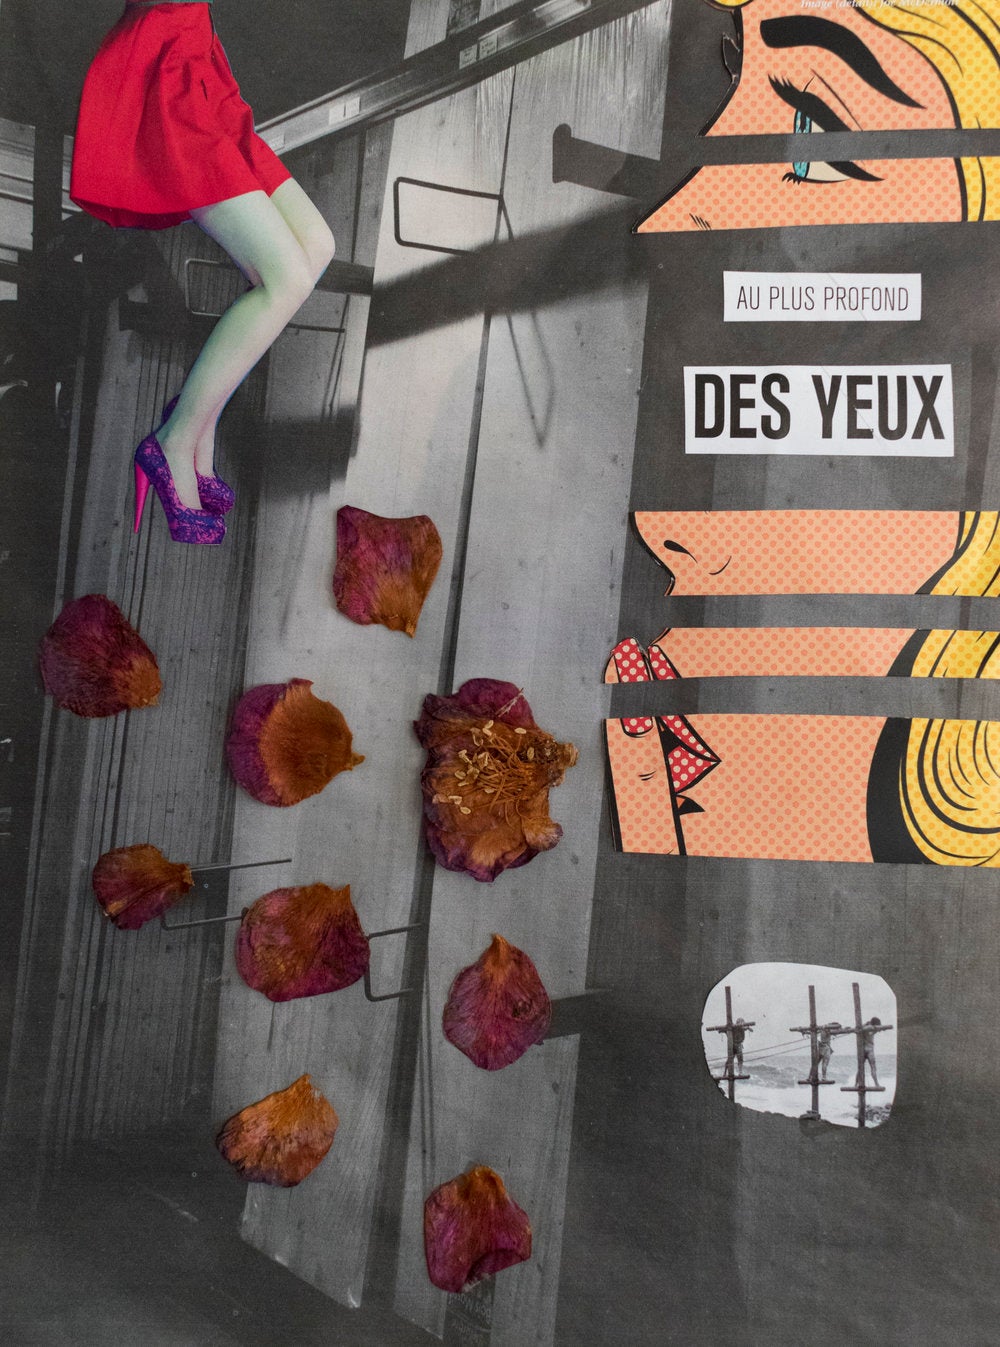 Collage. The lower half of a woman in a red dress and heels. Flower petals, and a cut-up image of a woman shushing. Magazine clippings read: "AU PLUS PROFOND" "DES YEUX"